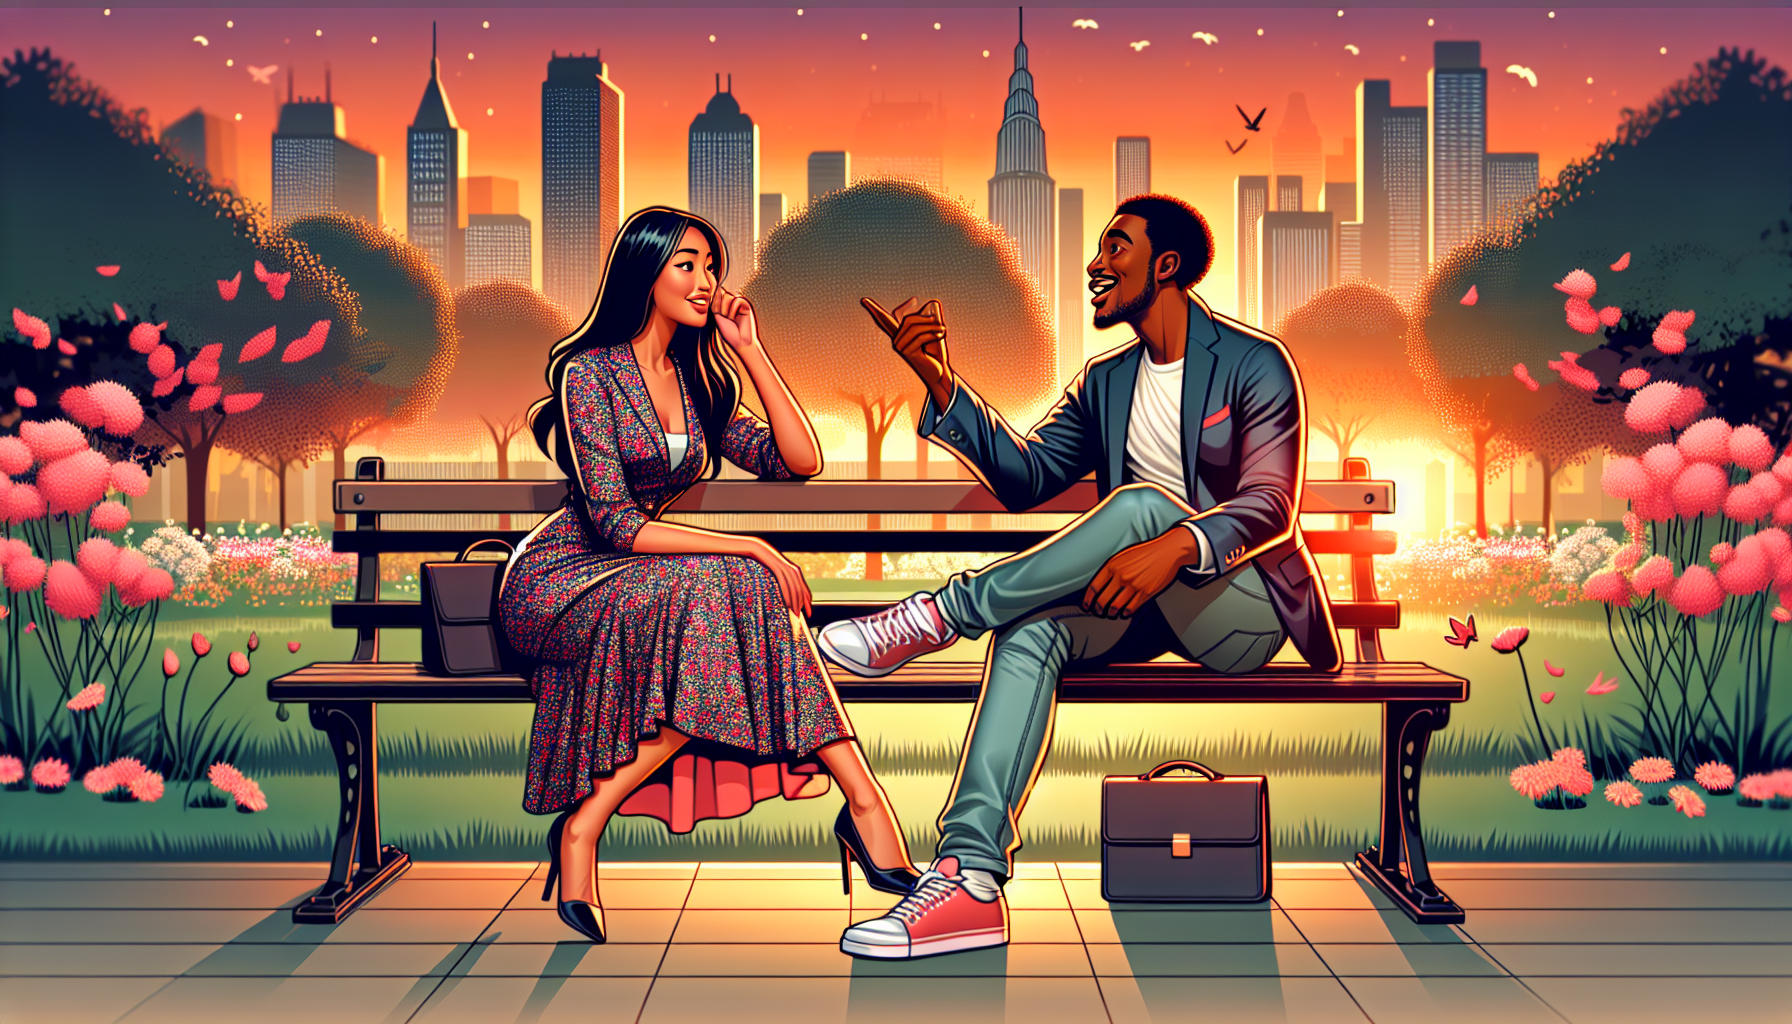 An artistic representation of two fictional characters, a man and a woman, sitting on a park bench during sunset, deeply engrossed in conversation. The man, an African American, is dressed smartly in